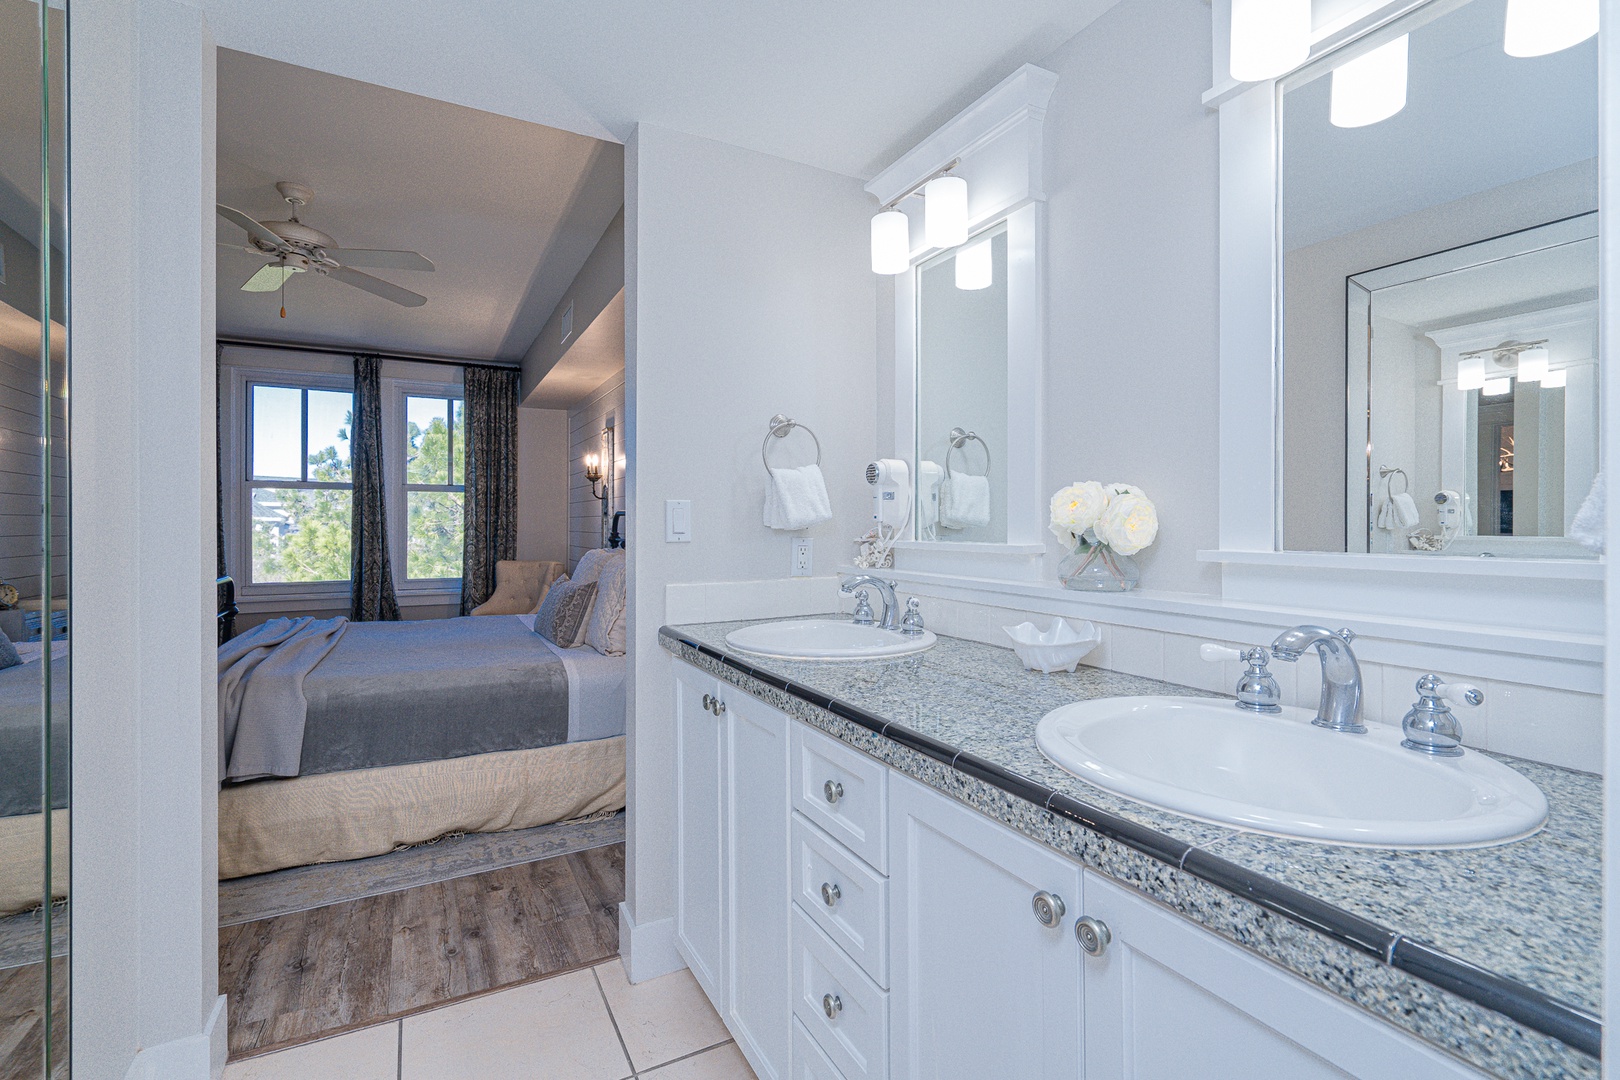 A double vanity & shower/tub combo await in the polished master ensuite